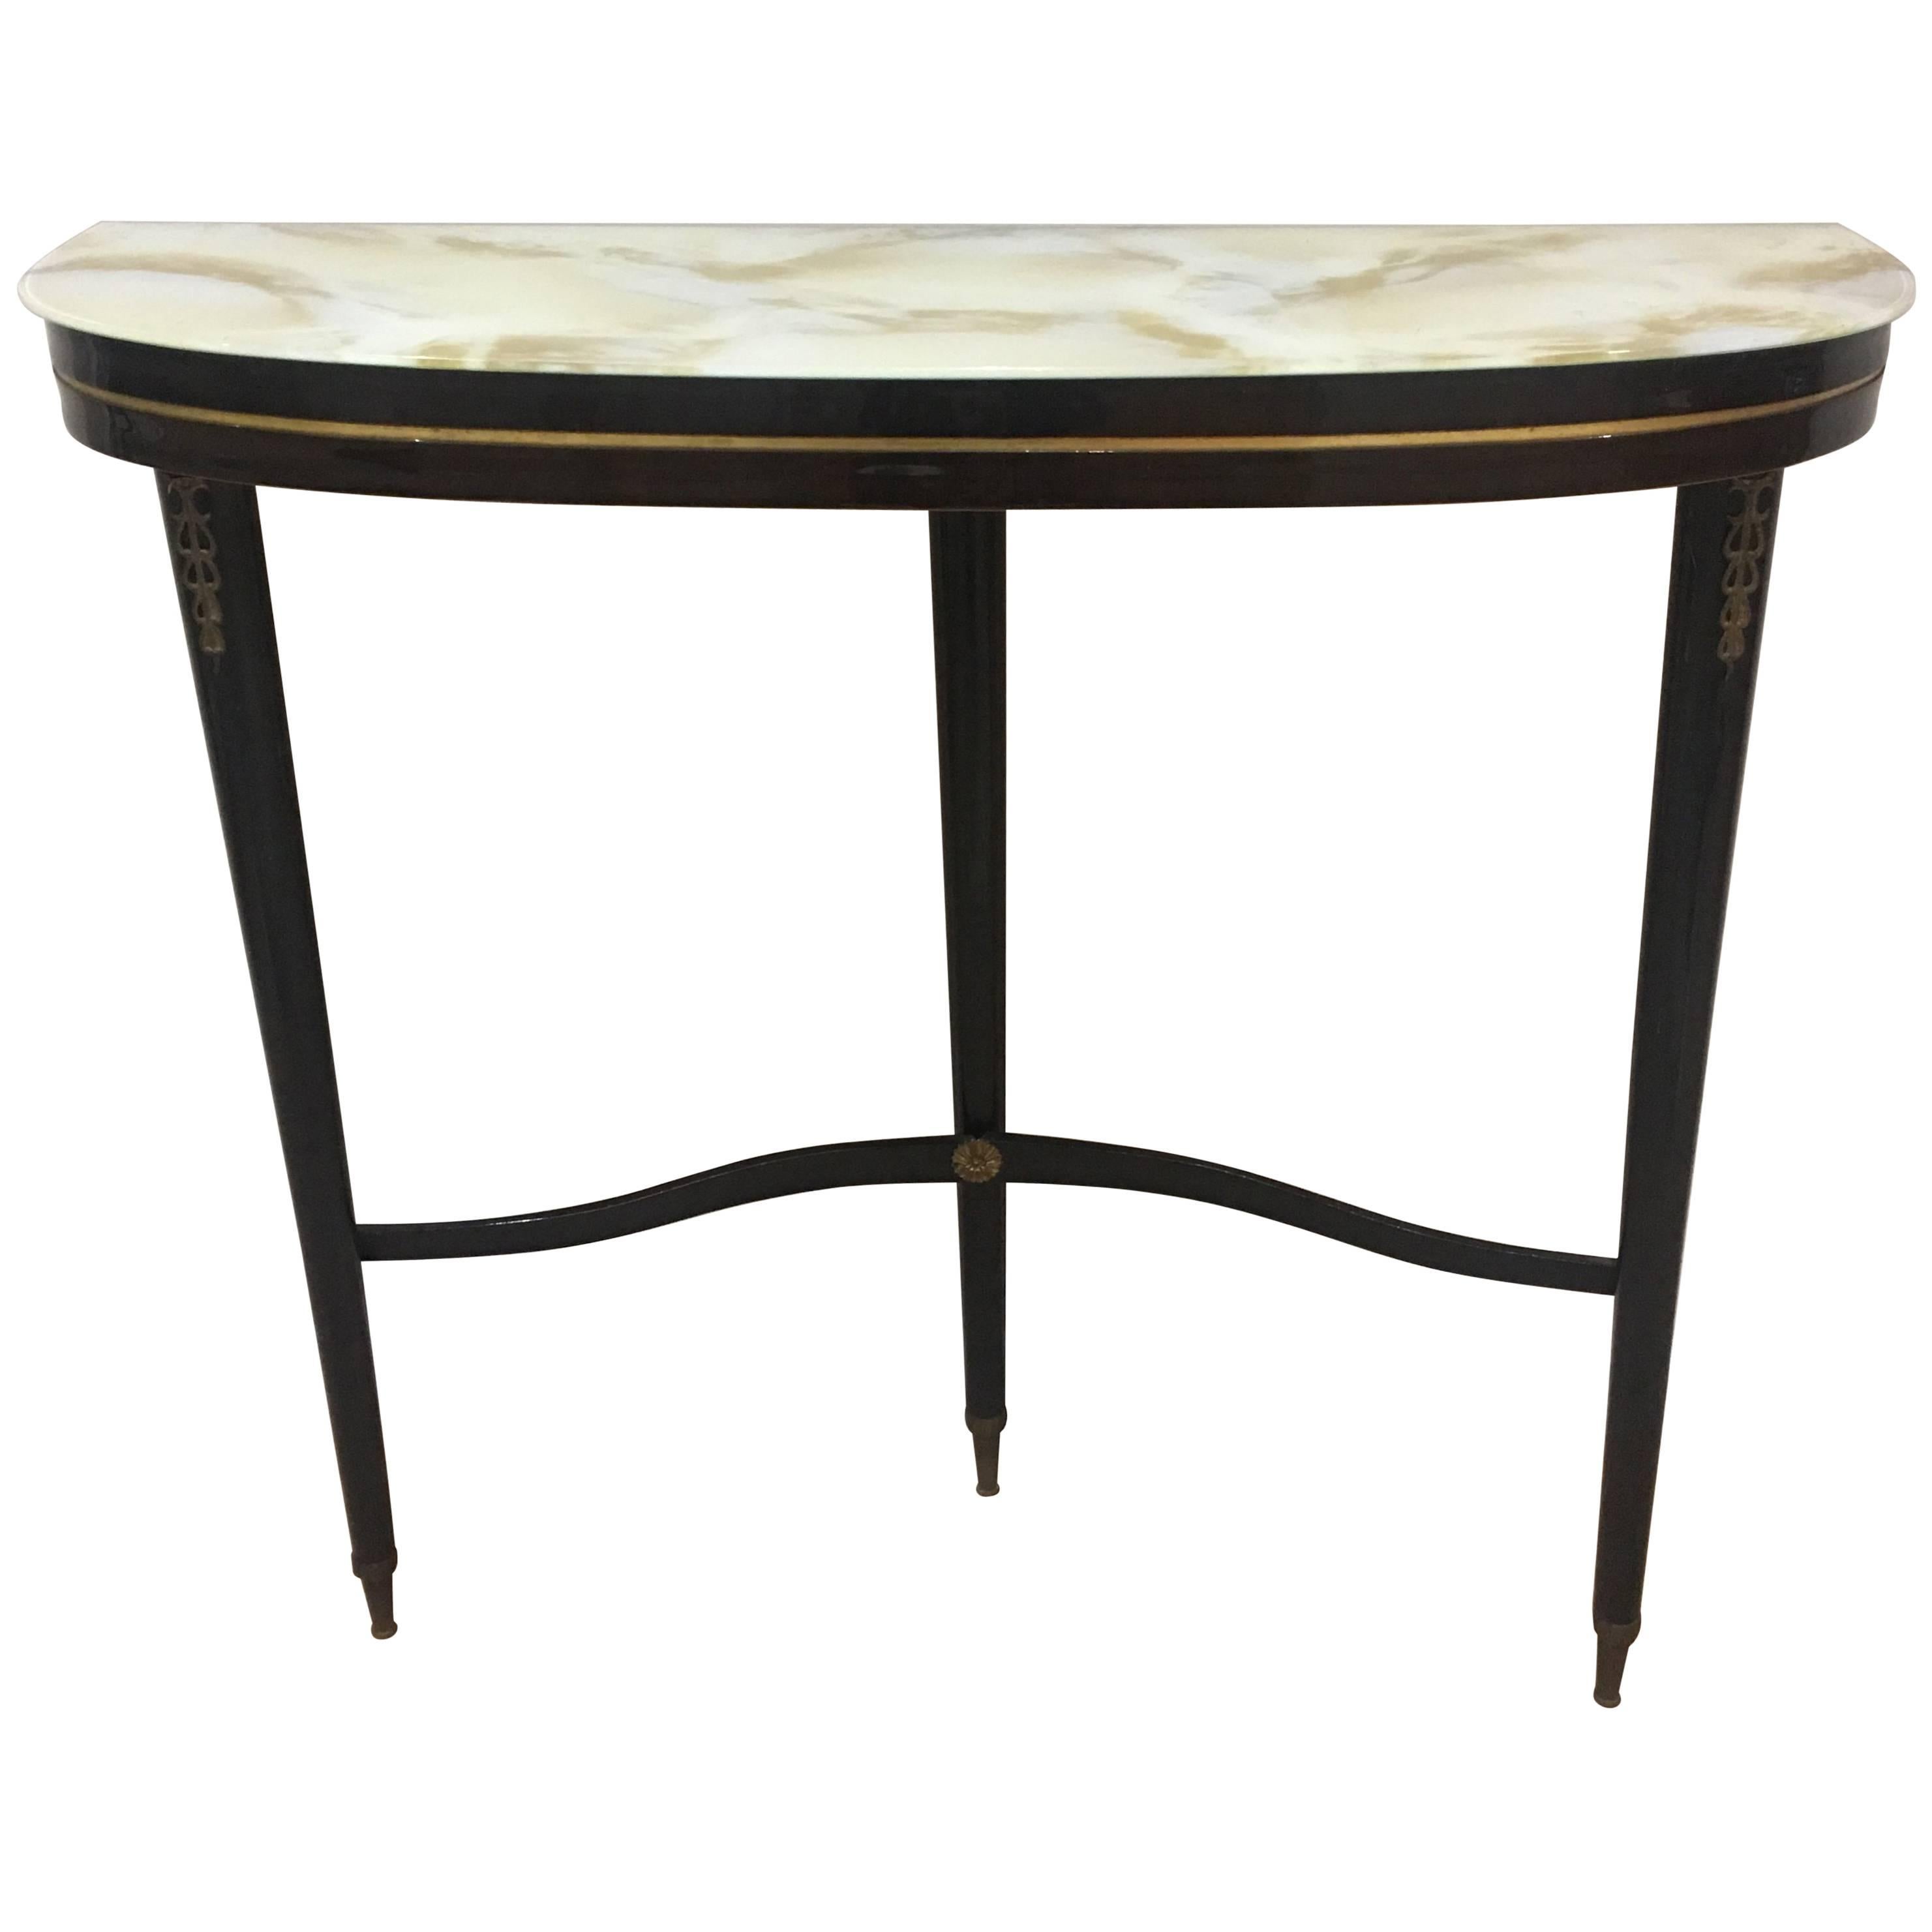 Italian Demilune Black Wooden Console Table with a Glass Top